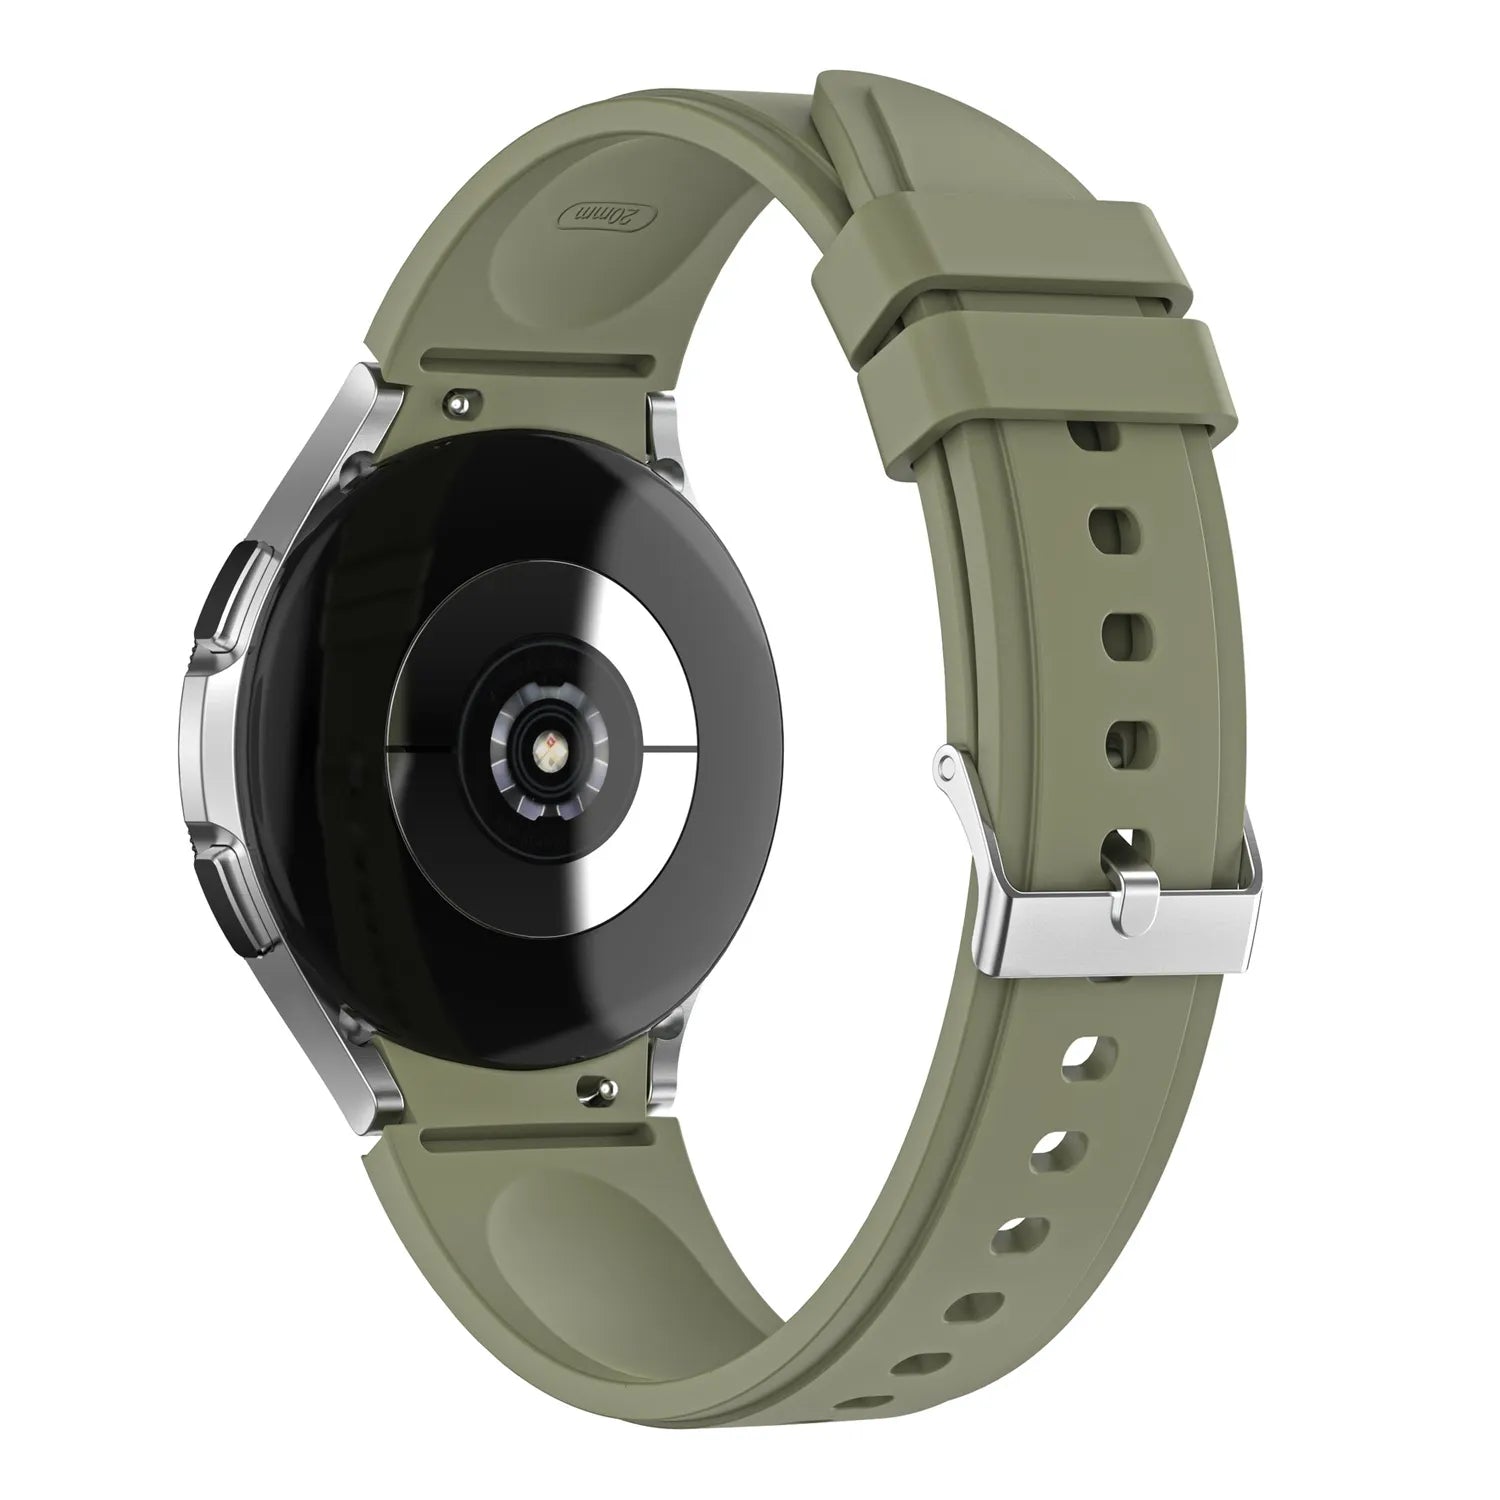 Galaxy Watch silicone band#color_calke green